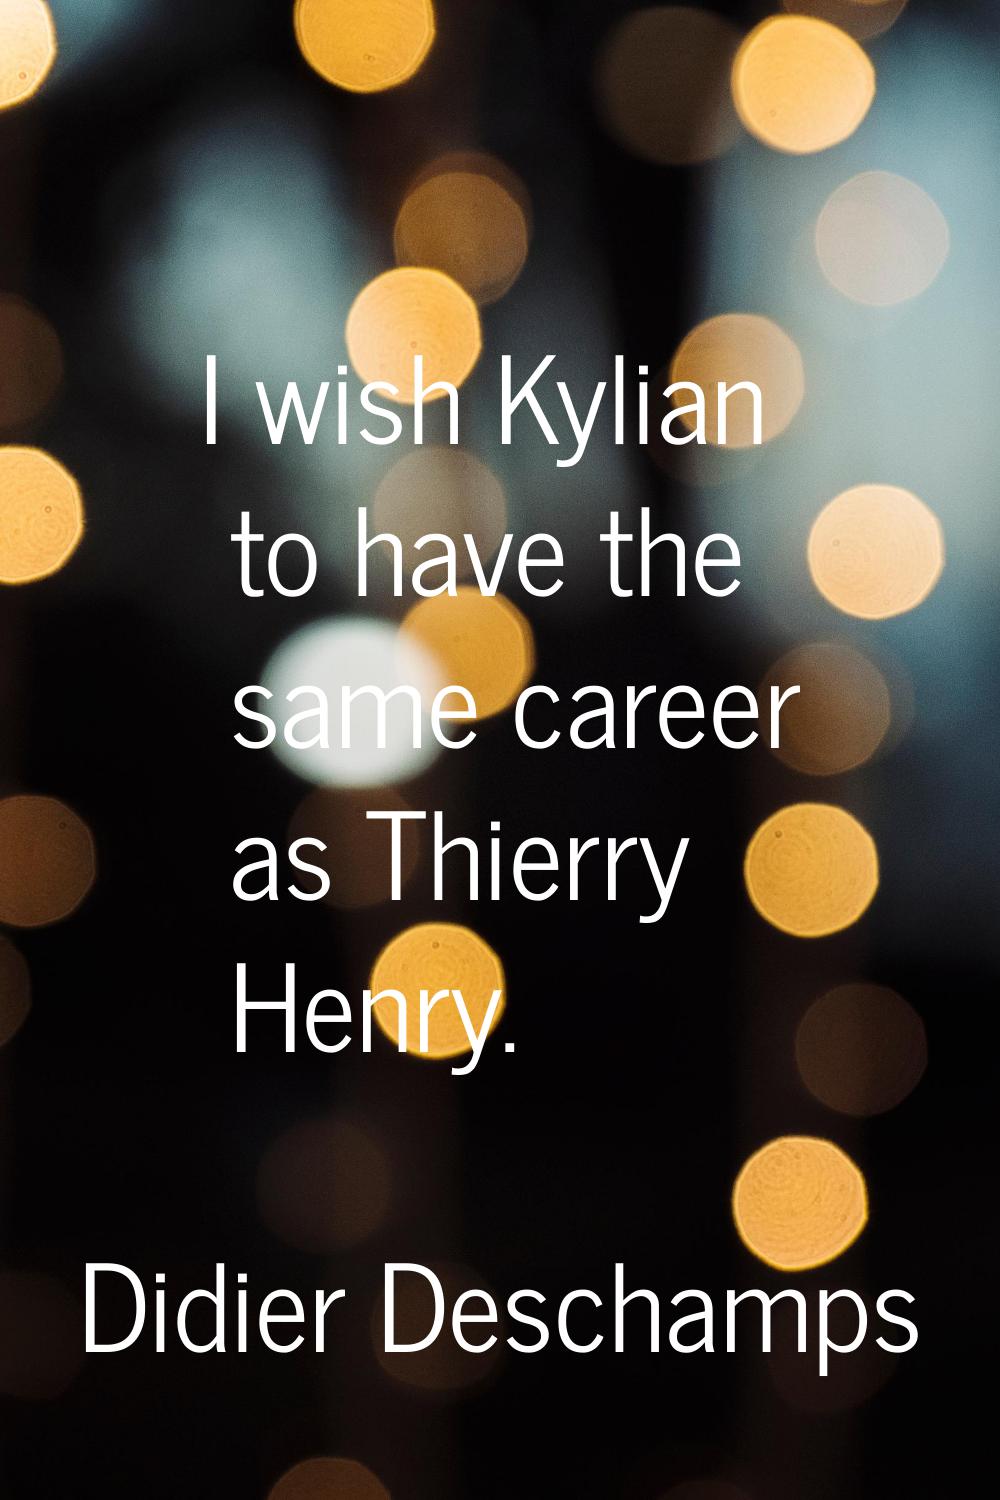 I wish Kylian to have the same career as Thierry Henry.